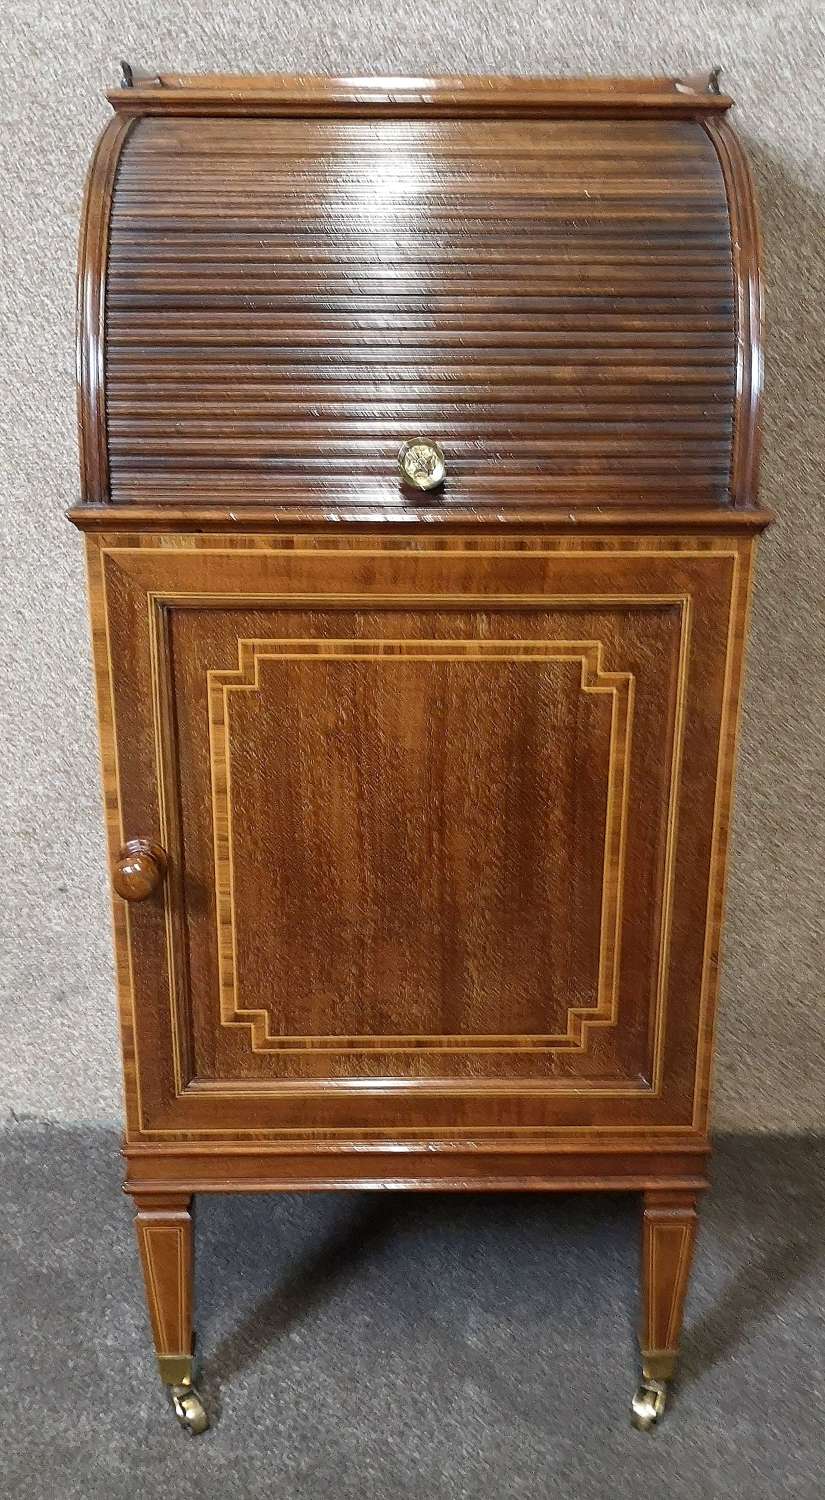 19th Century Inlaid Mahogany Tambour Shutter Cabinet / Bedside Cupboar